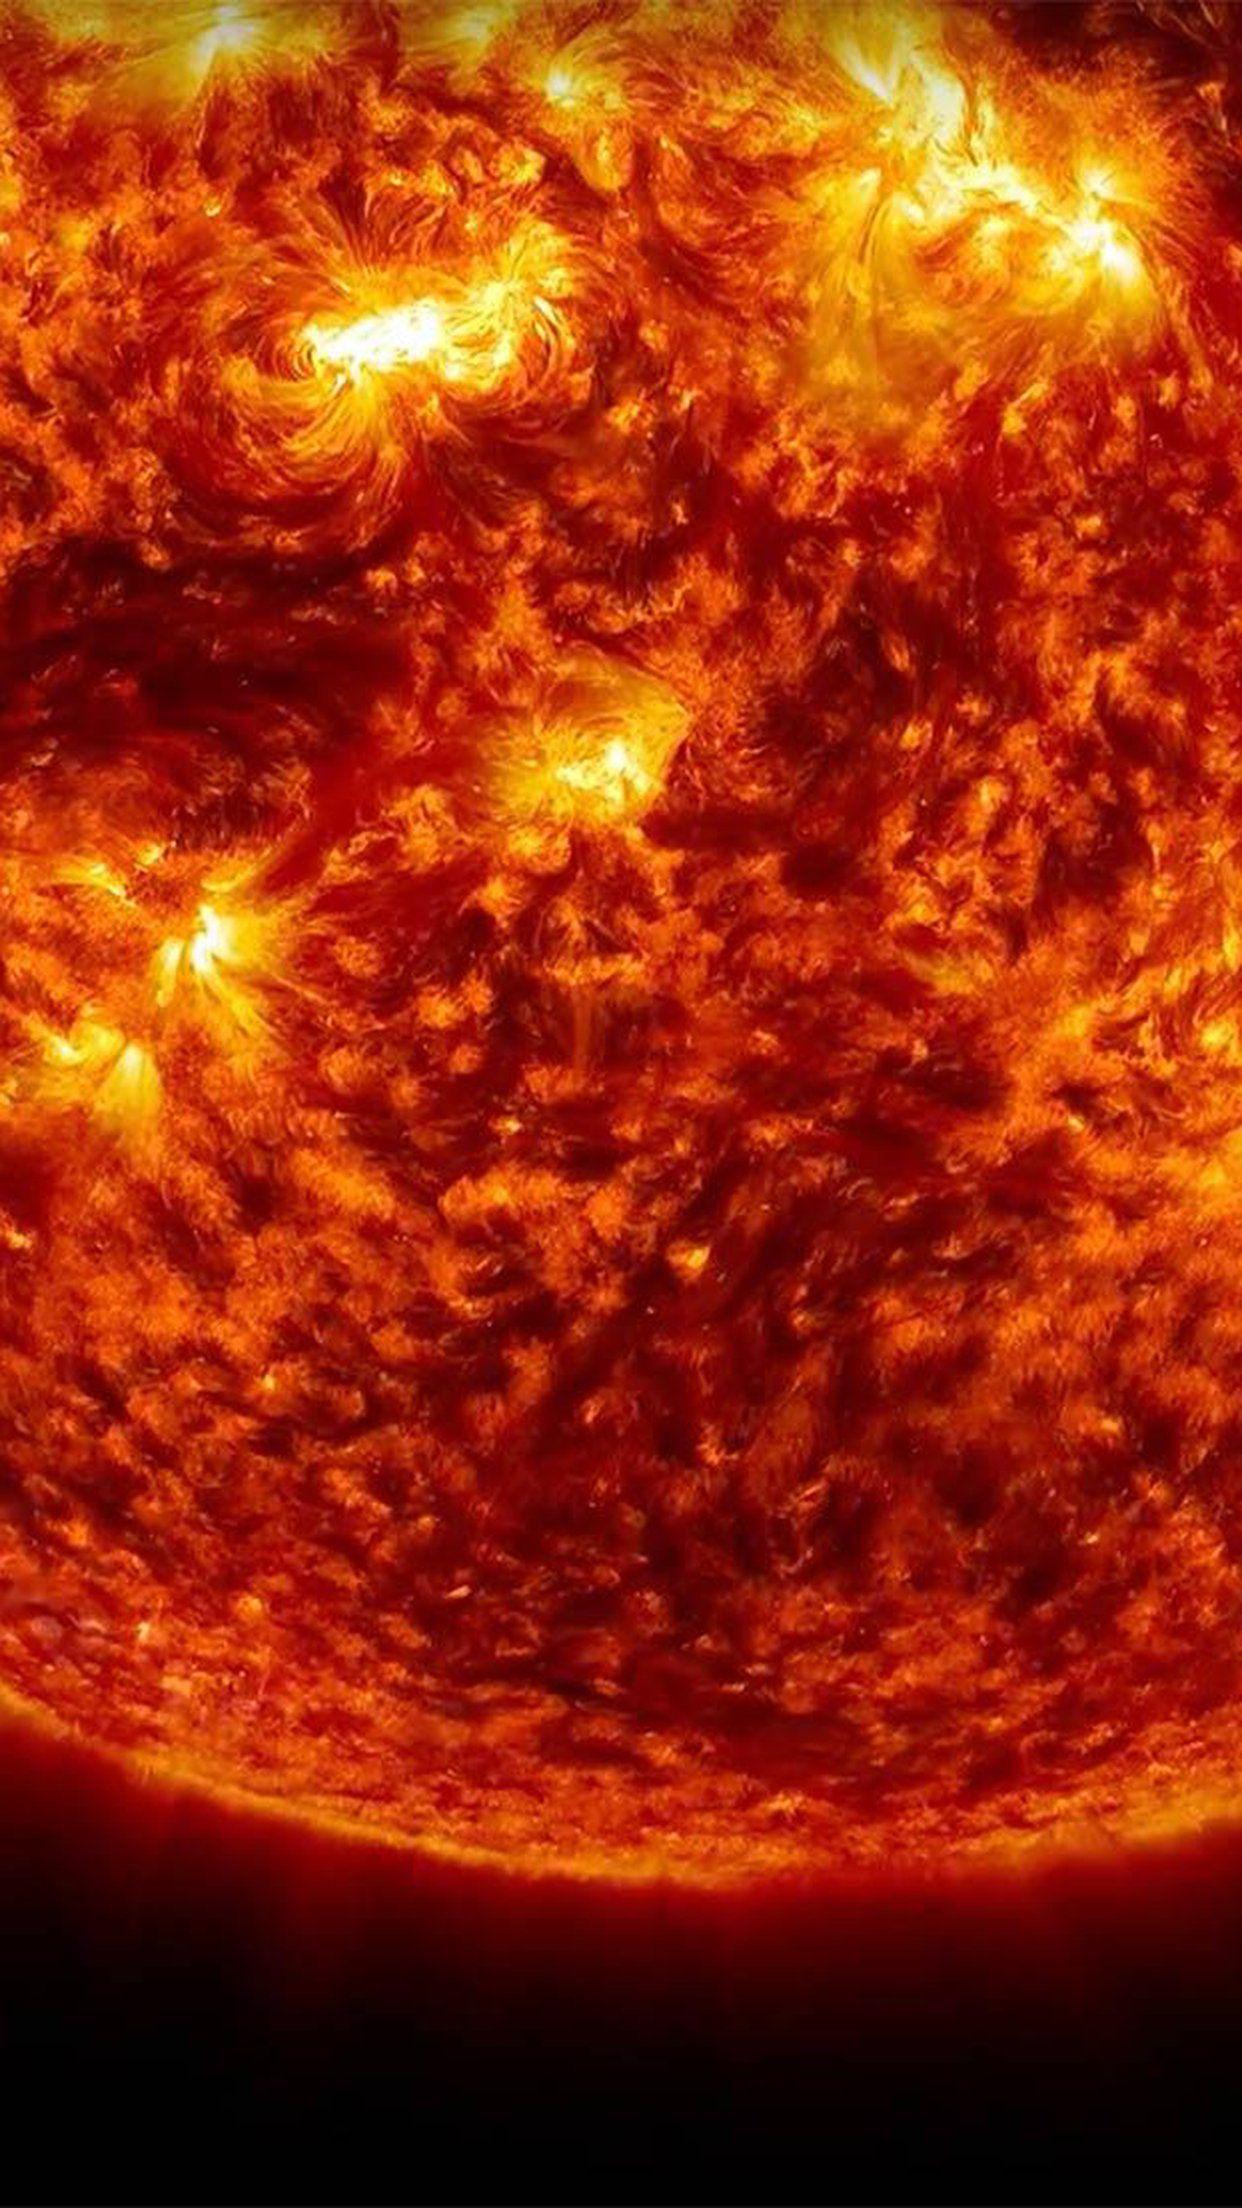 Stunning view of solar flare | Space | EarthSky